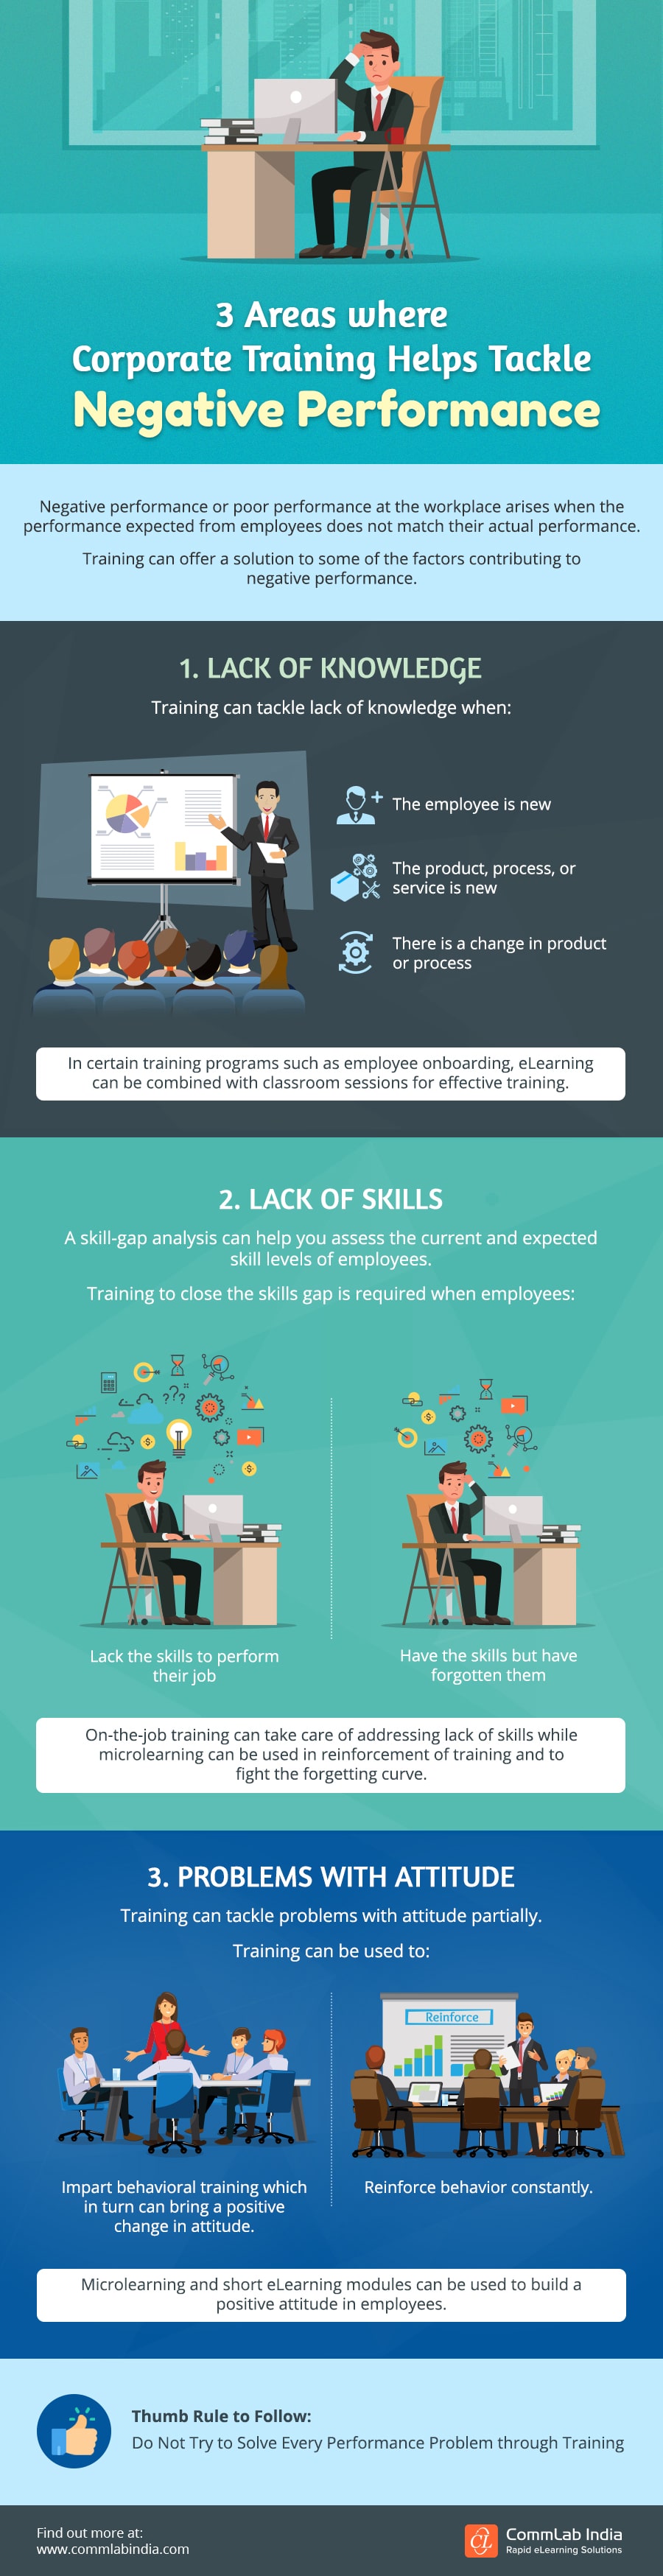 3 Areas Where Corporate Training Helps Tackle Negative Performance [Infographic]